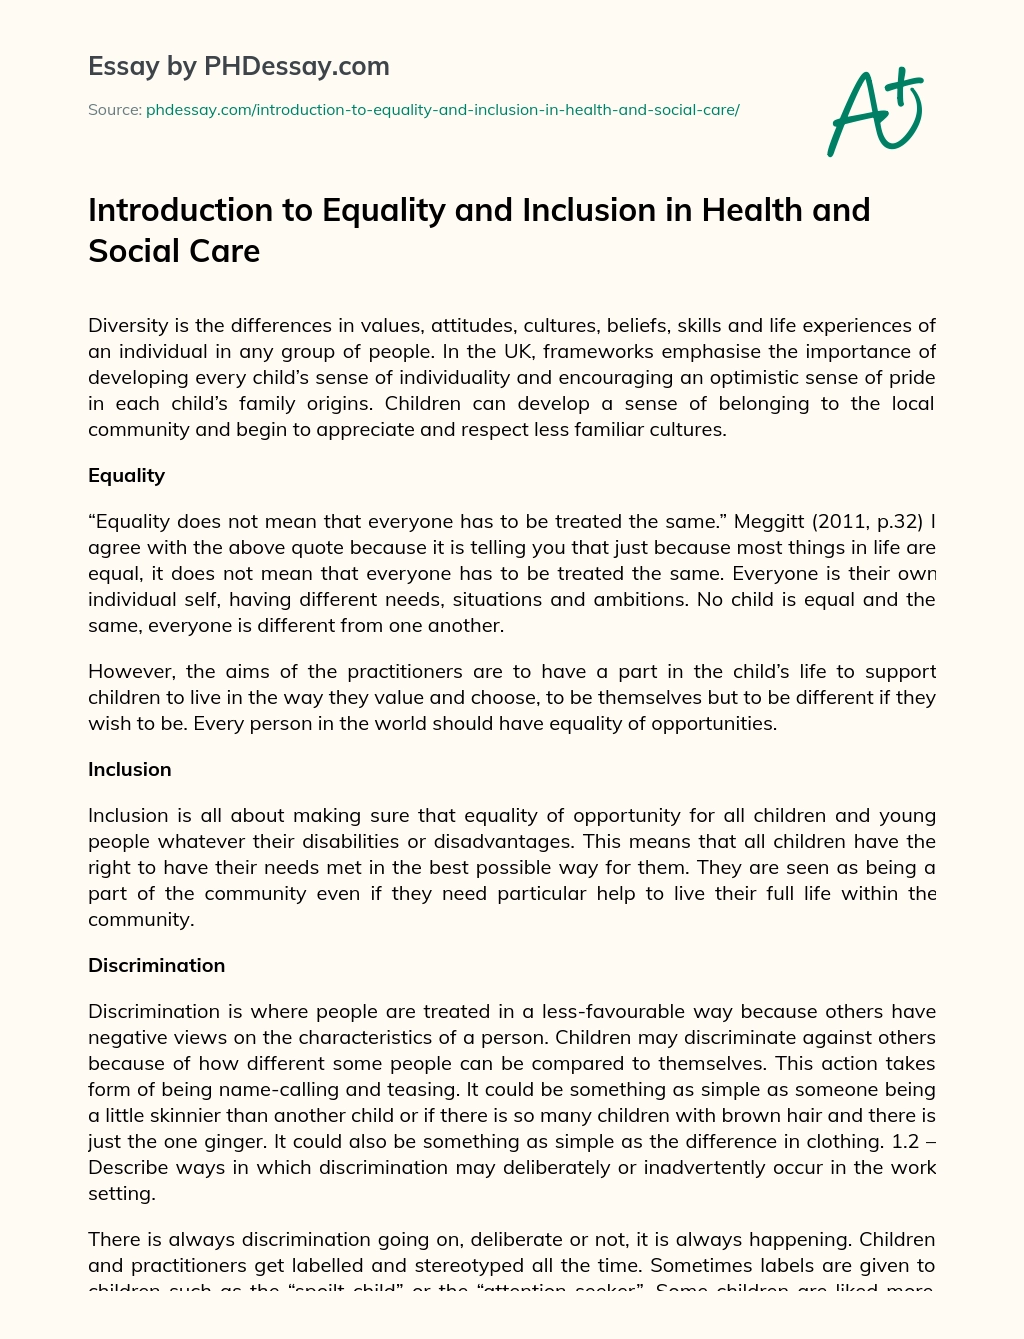 Introduction to Equality and Inclusion in Health and Social Care essay